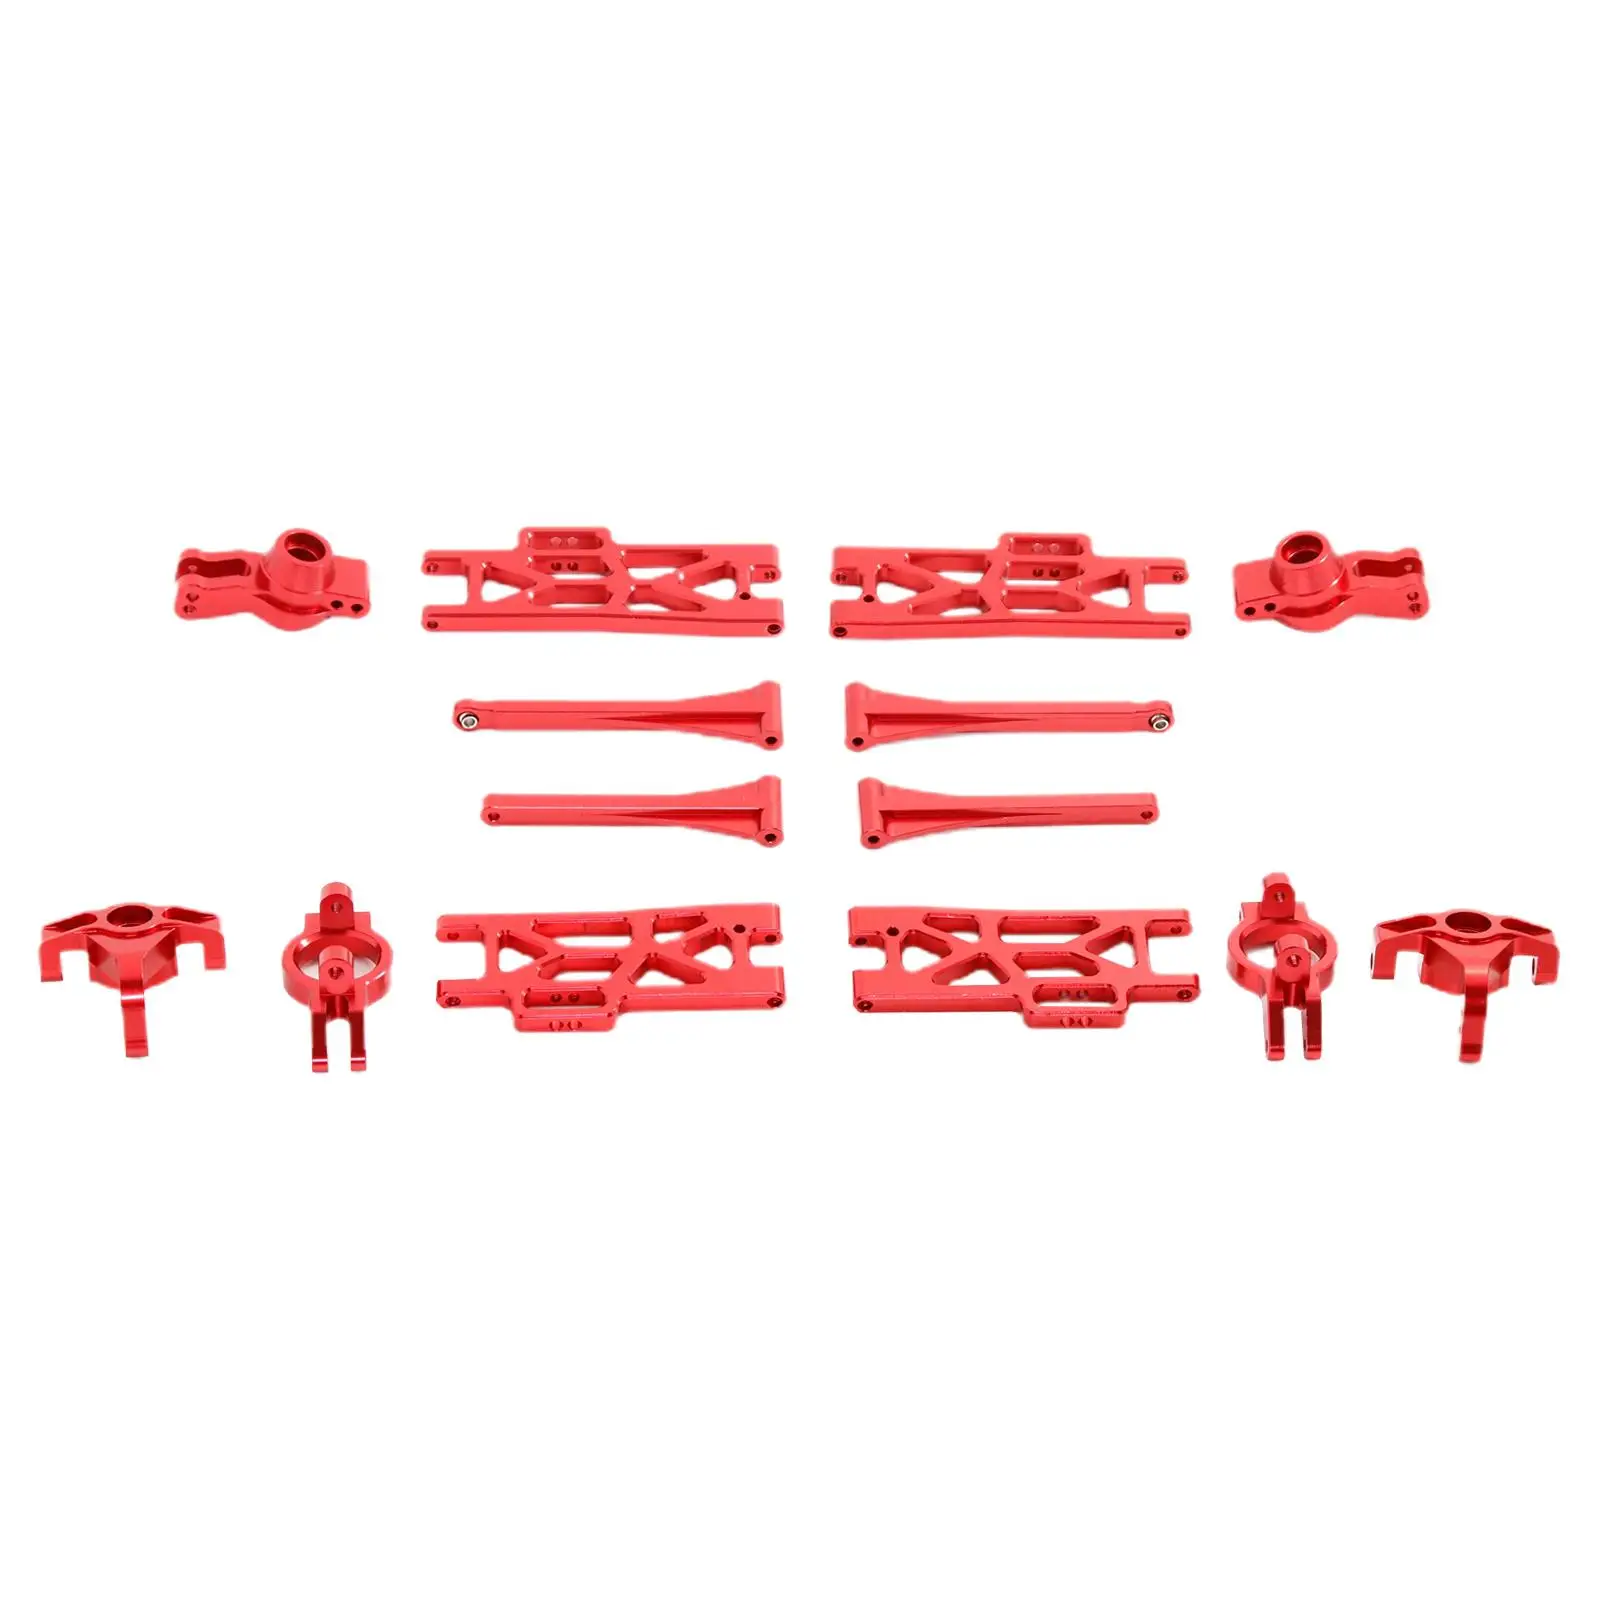 Metal RC Car Part Kit Body Parts Replacement Parts DIY Assembly Swing Arm for Wltoys 12401 104009 12402 1/12 RC Model Car